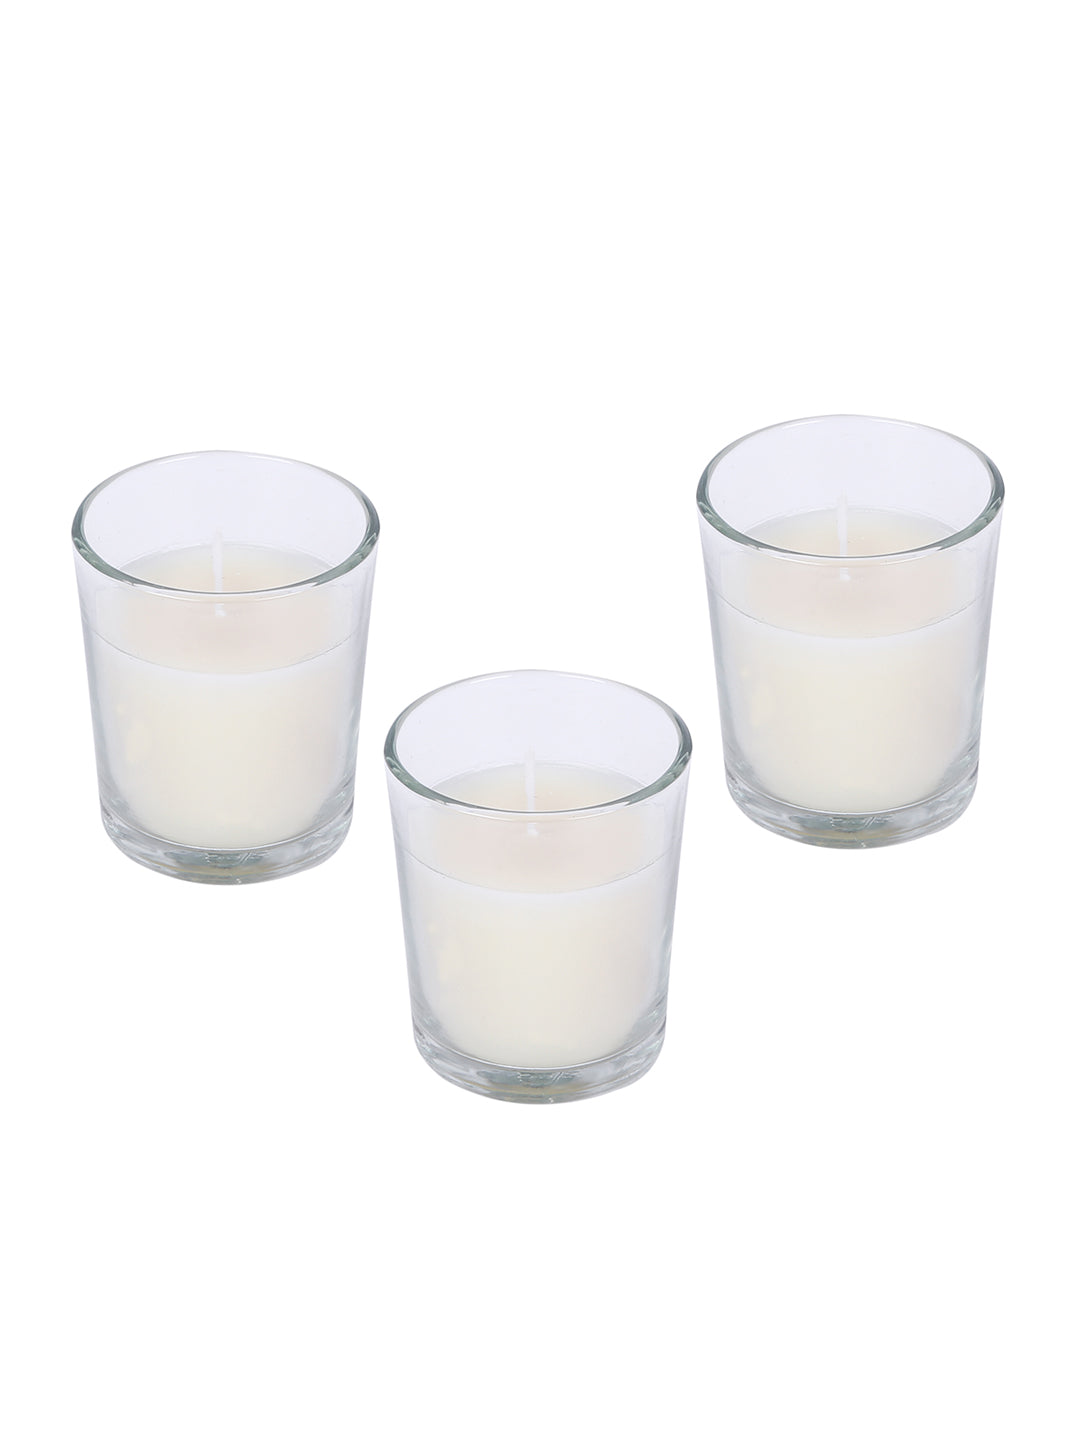 Set of 3 Hosley® Highly Fragranced Sweet Pea Jasmine  Filled Glass Candles, 1.6 Oz wax each